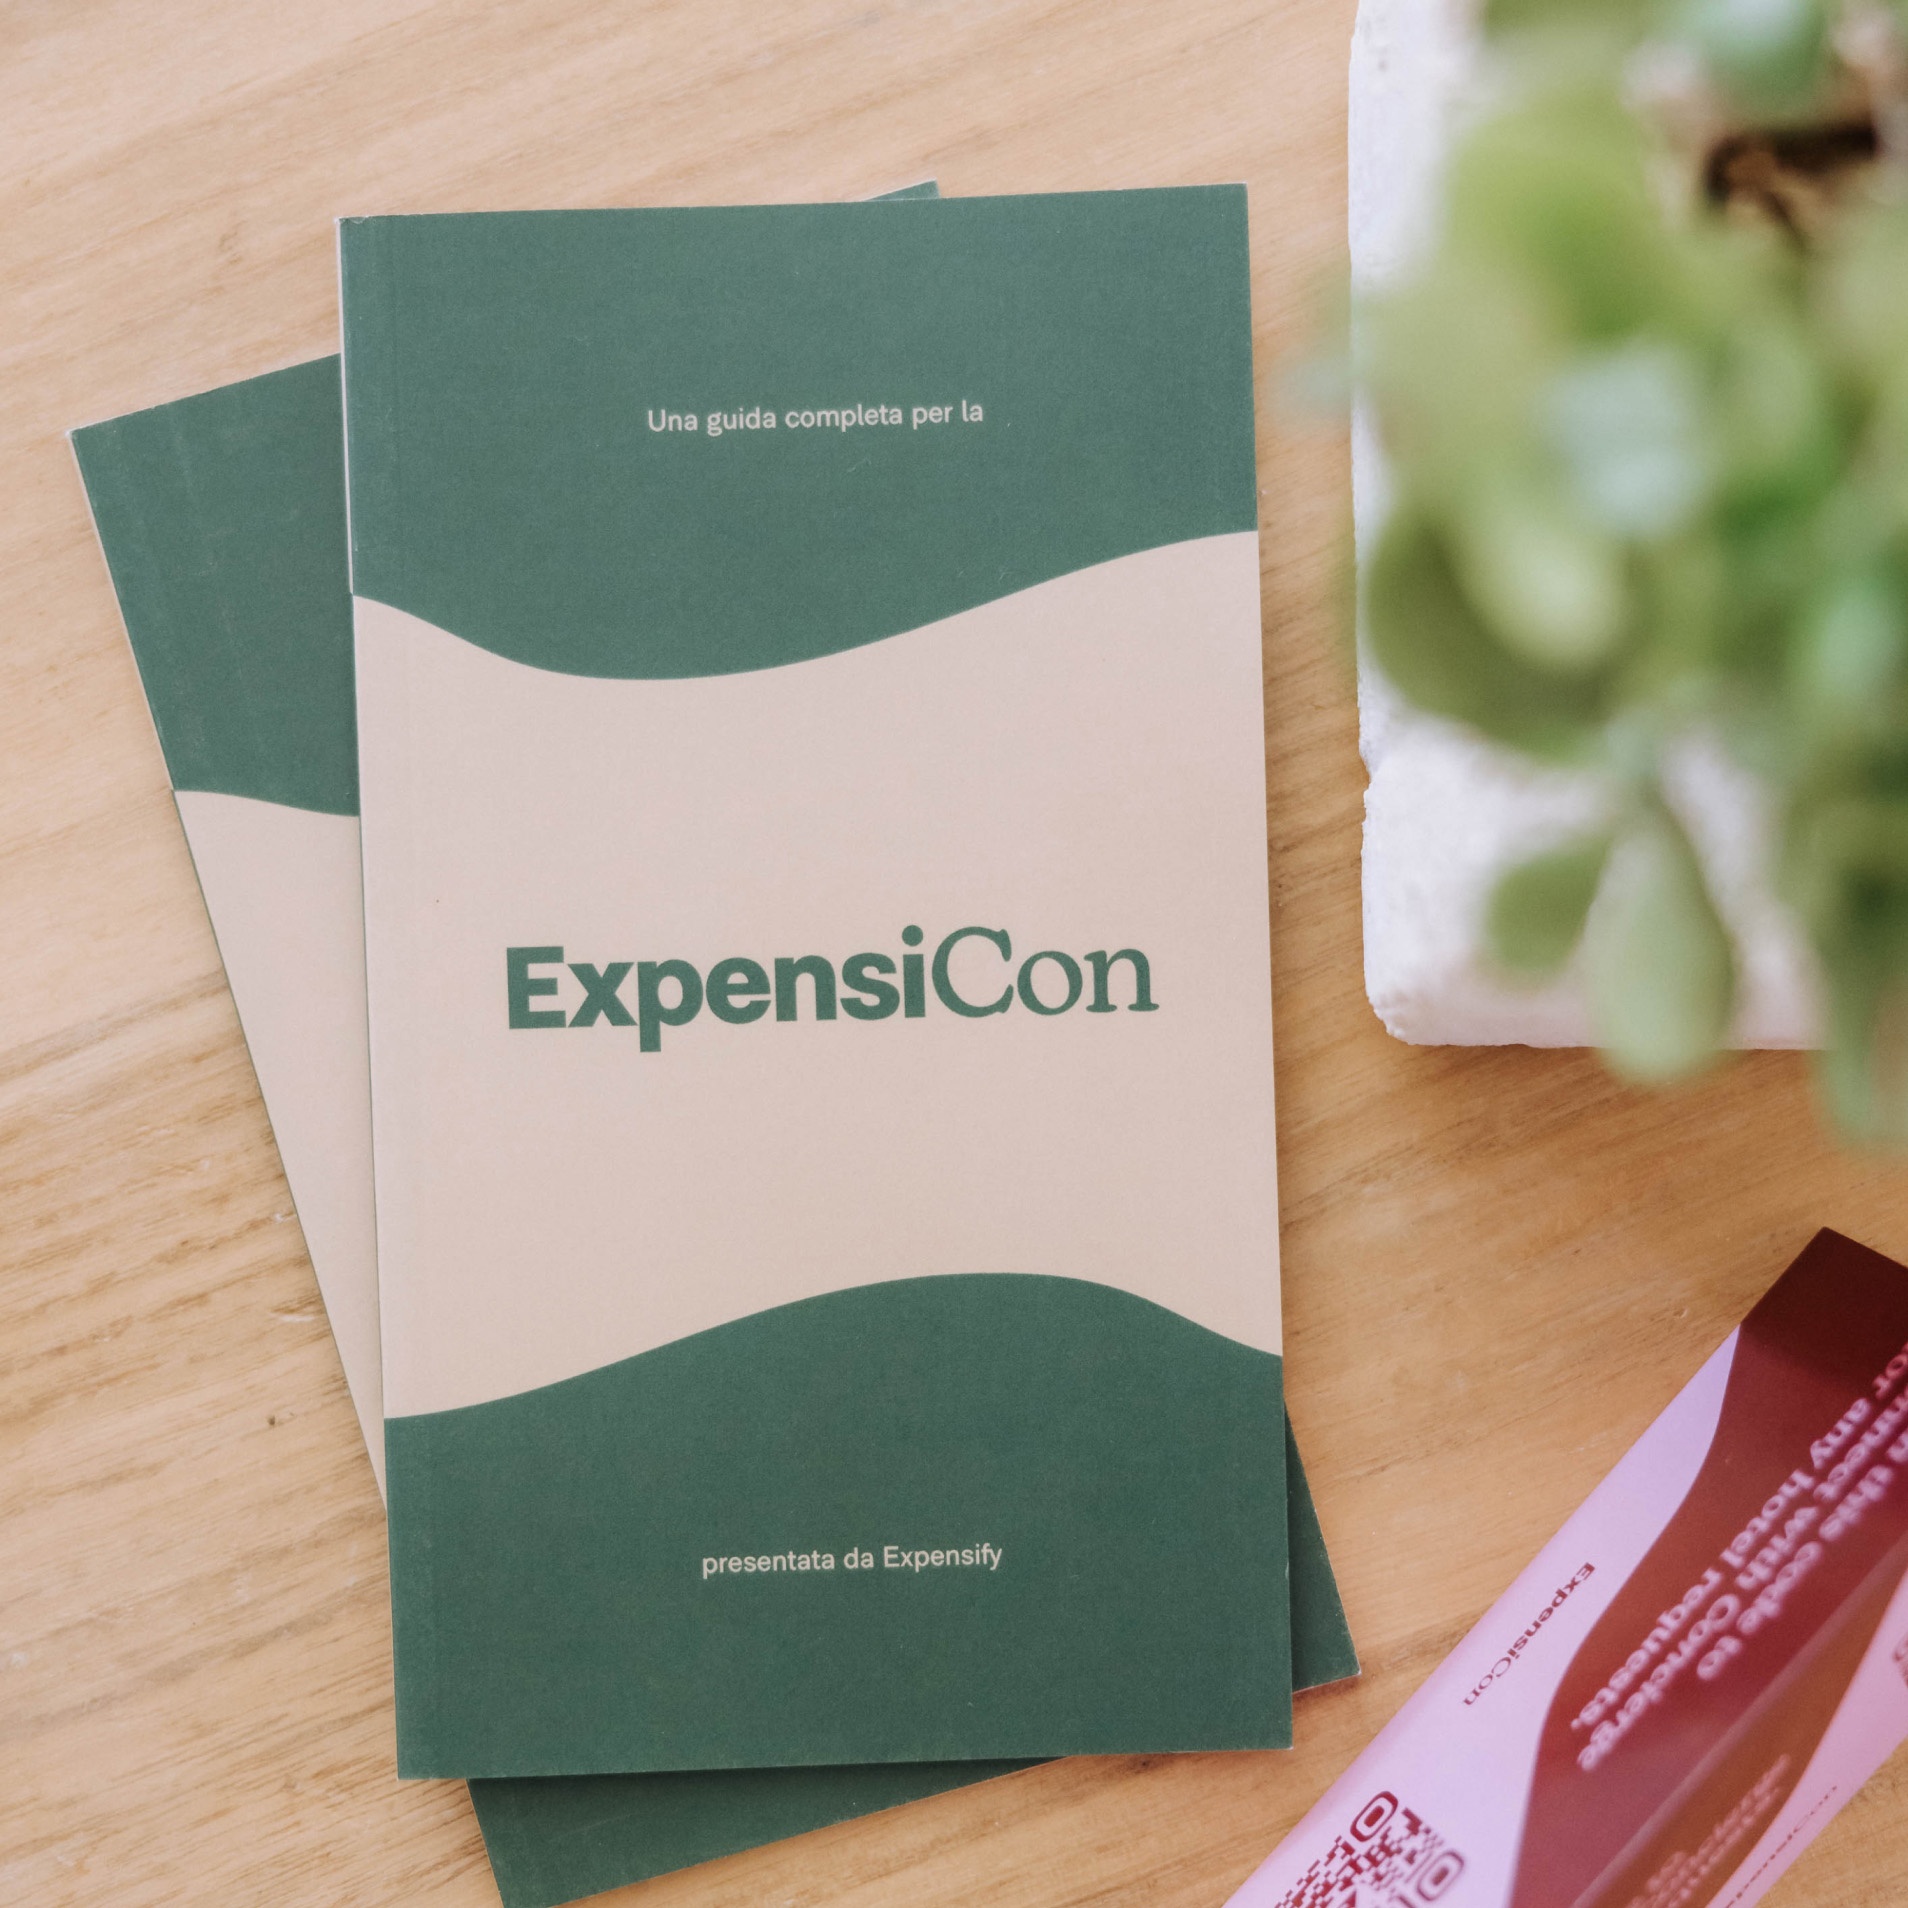 Photo of the Expensicon booklet